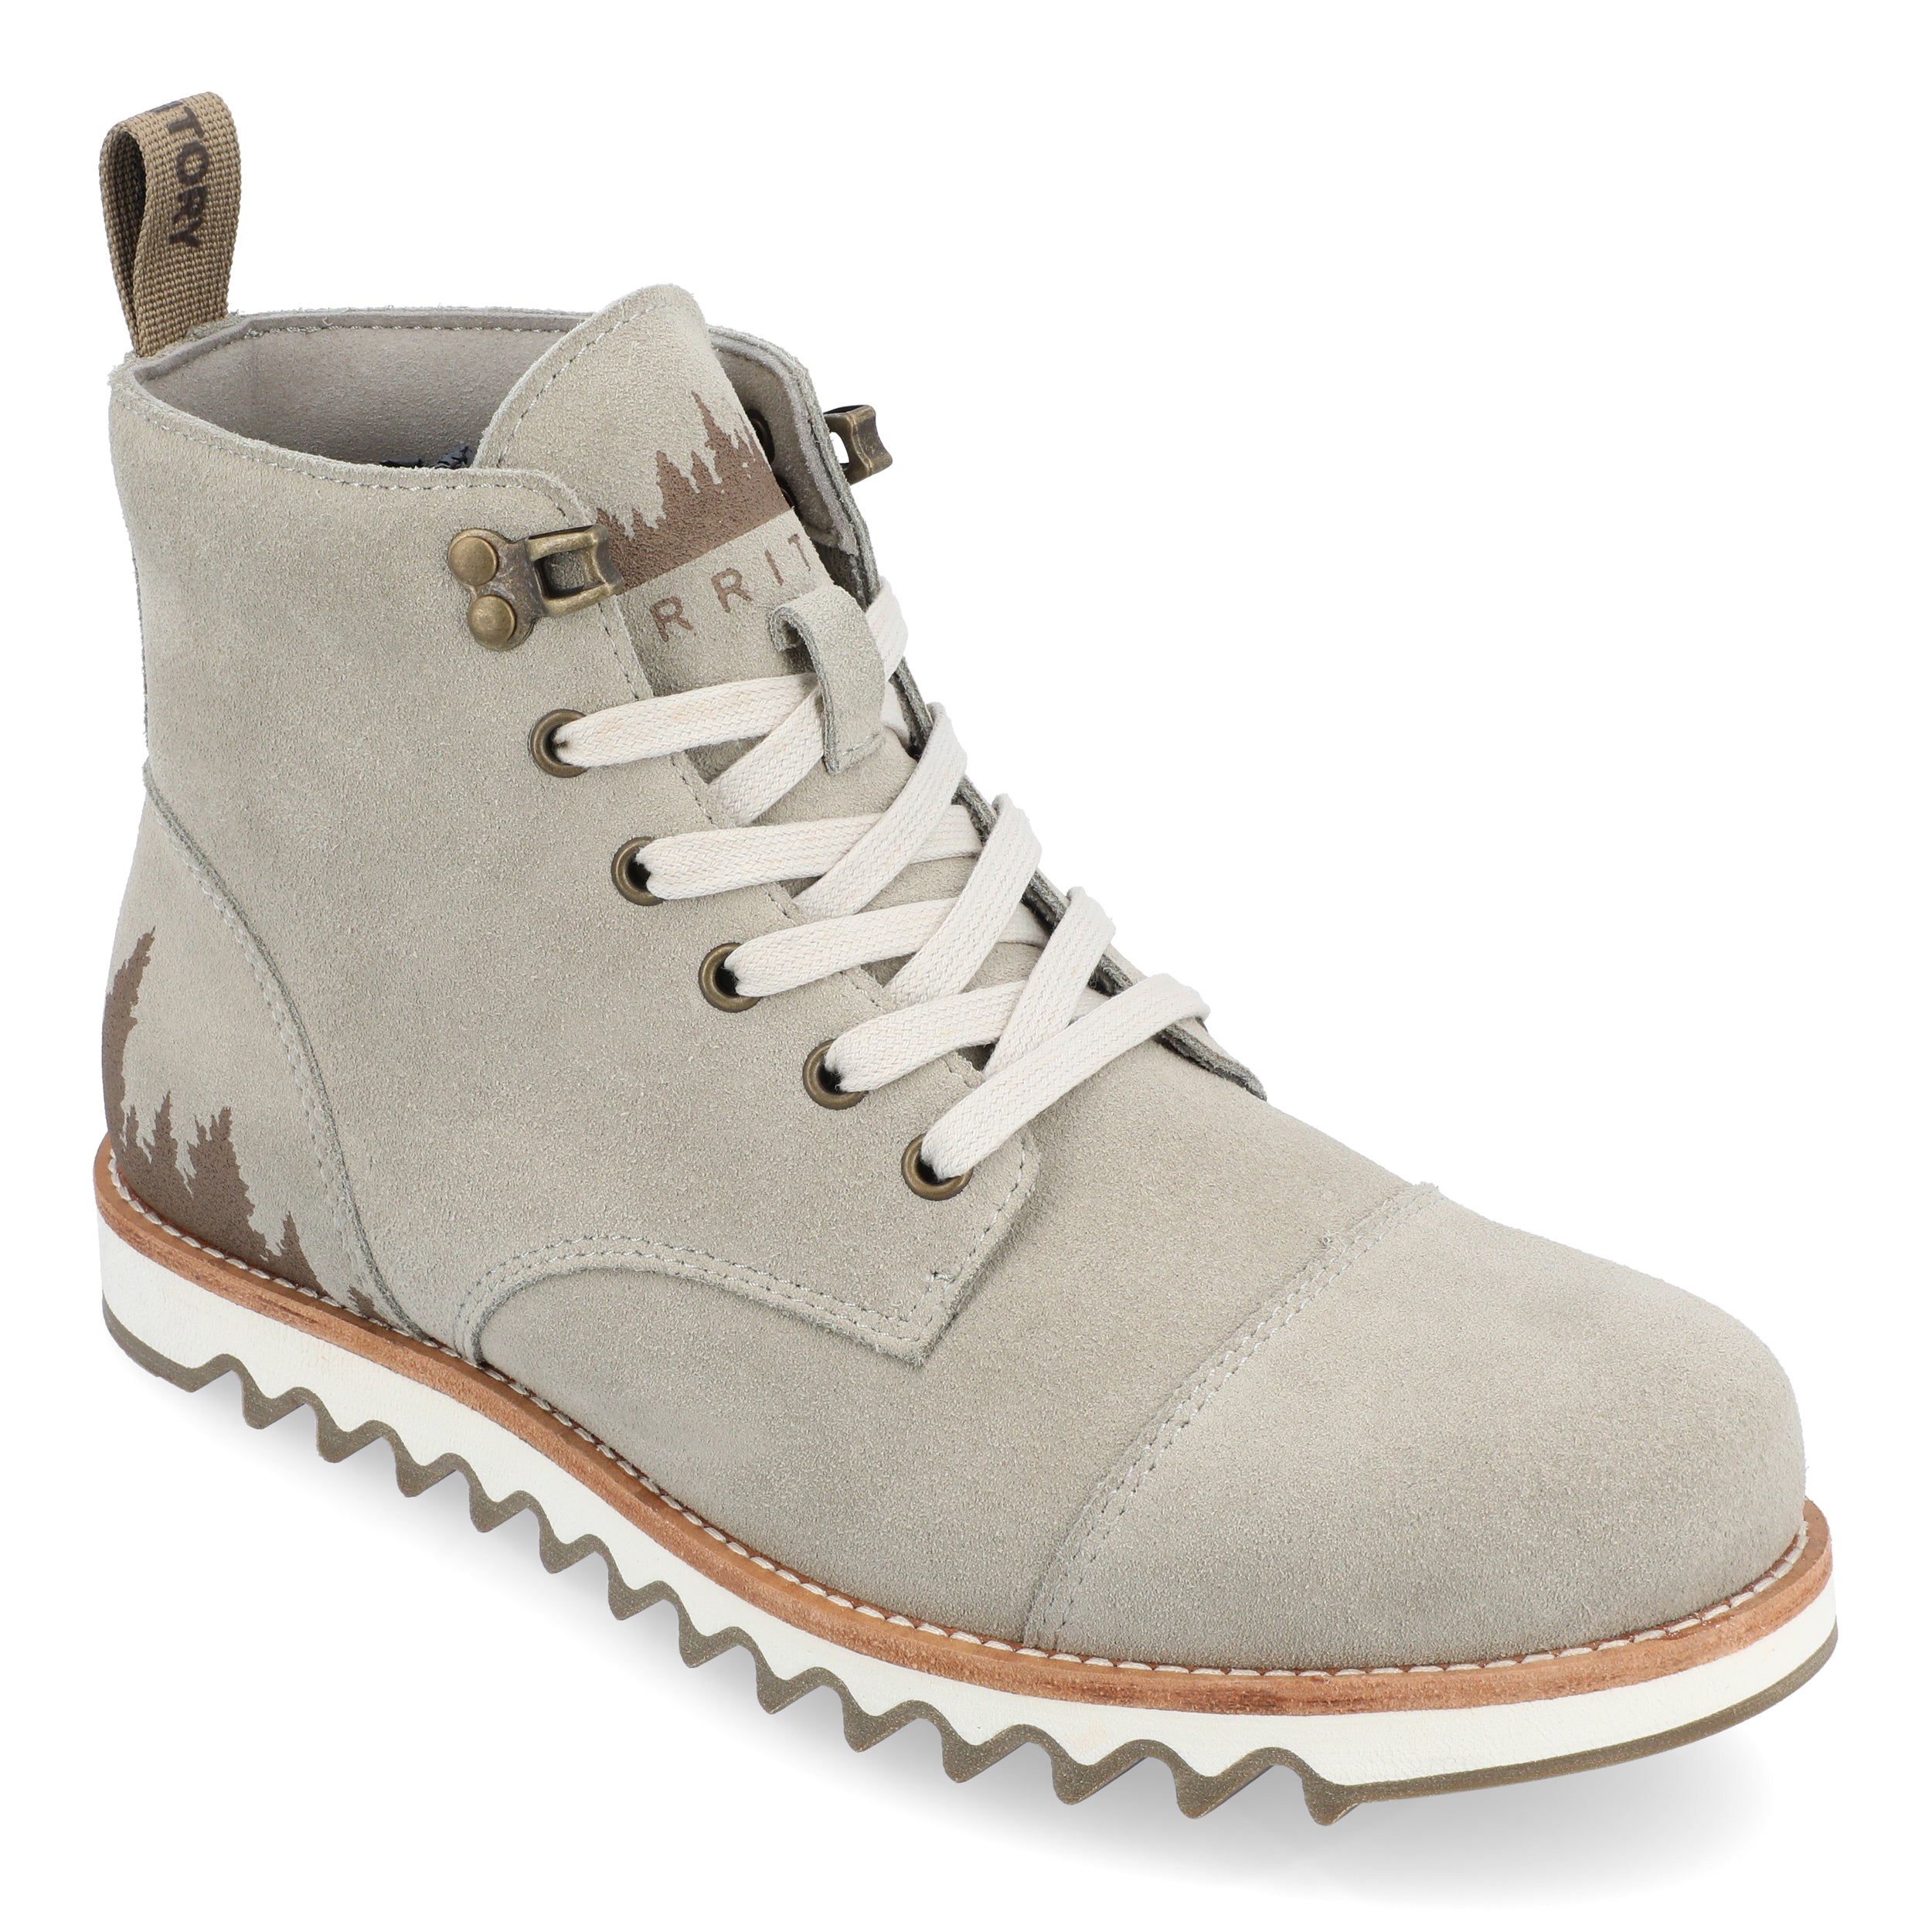 ZION - Genuine Water-Resistant Leather Hiking Boot